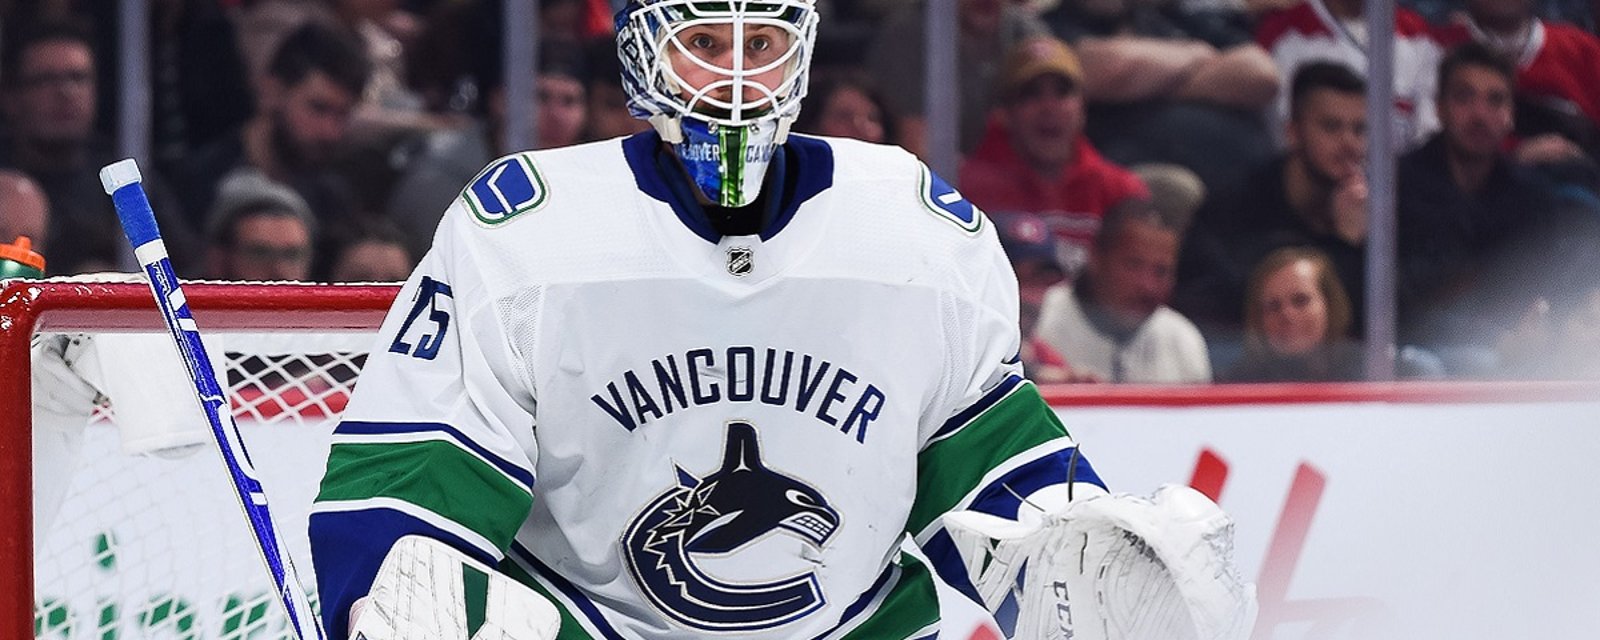 Jacob Markstrom makes a heartbreaking announcement on Sunday.